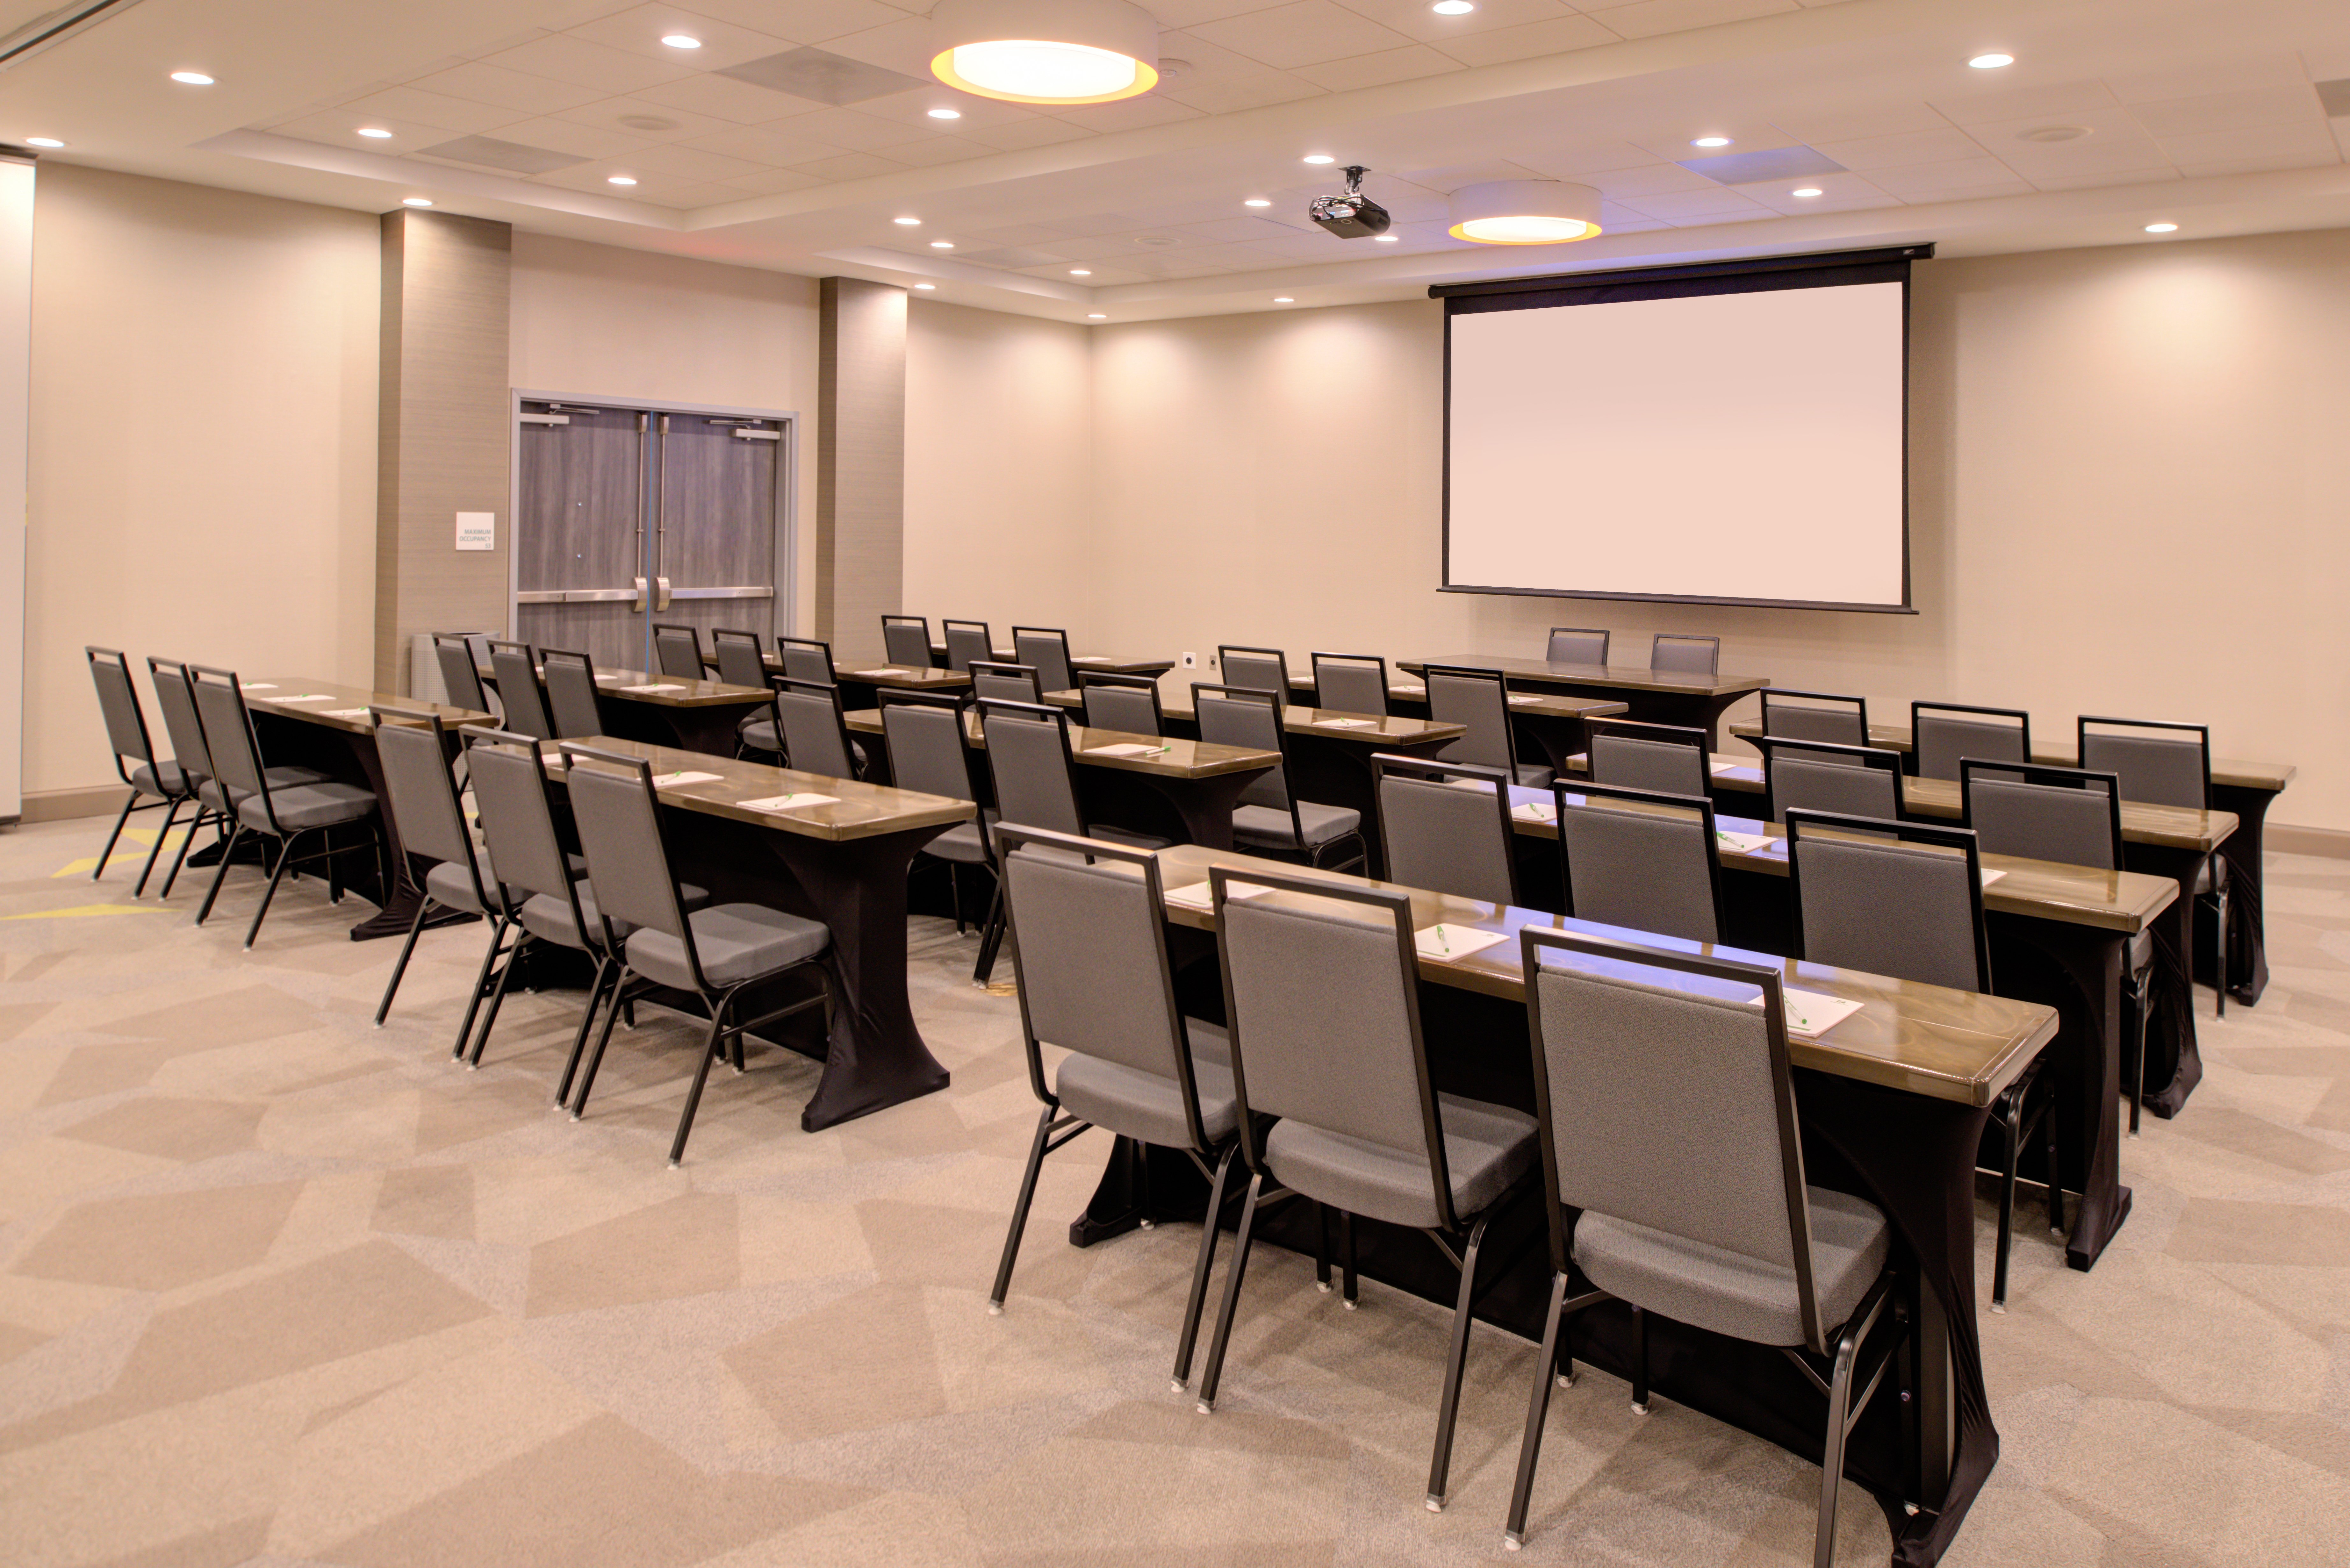 Host your Conference in one of our fully-equipped Meeting Rooms